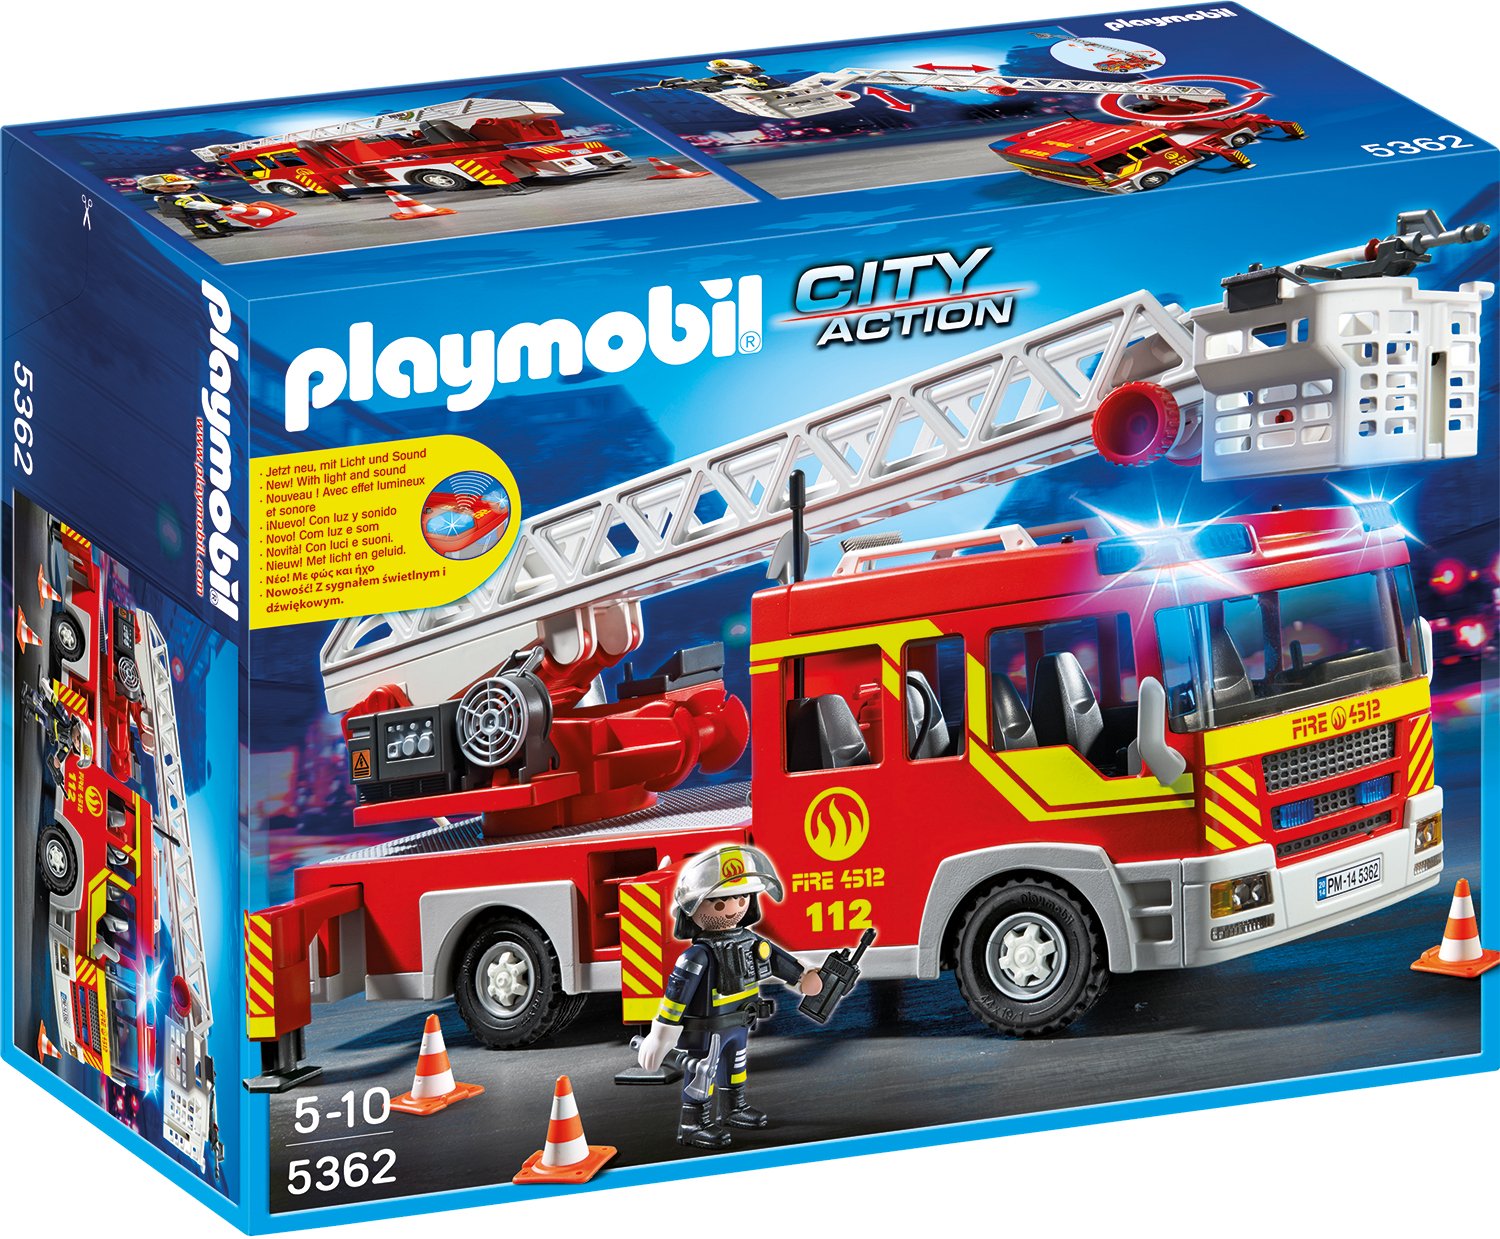 Playmobil City Action Ladder Unit With Lights And Sound